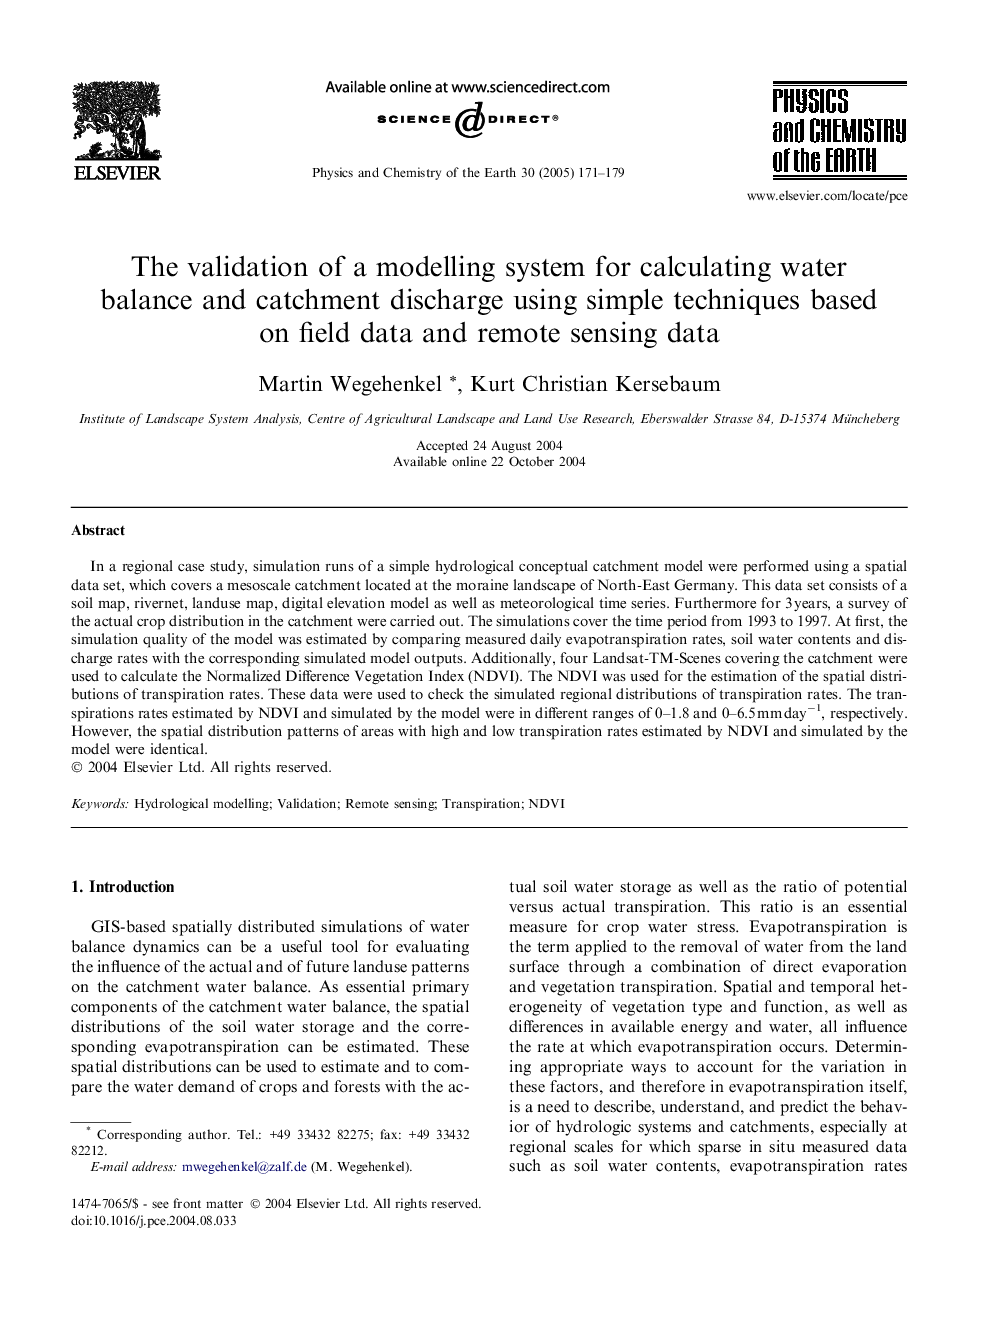 The validation of a modelling system for calculating water balance and catchment discharge using simple techniques based on field data and remote sensing data